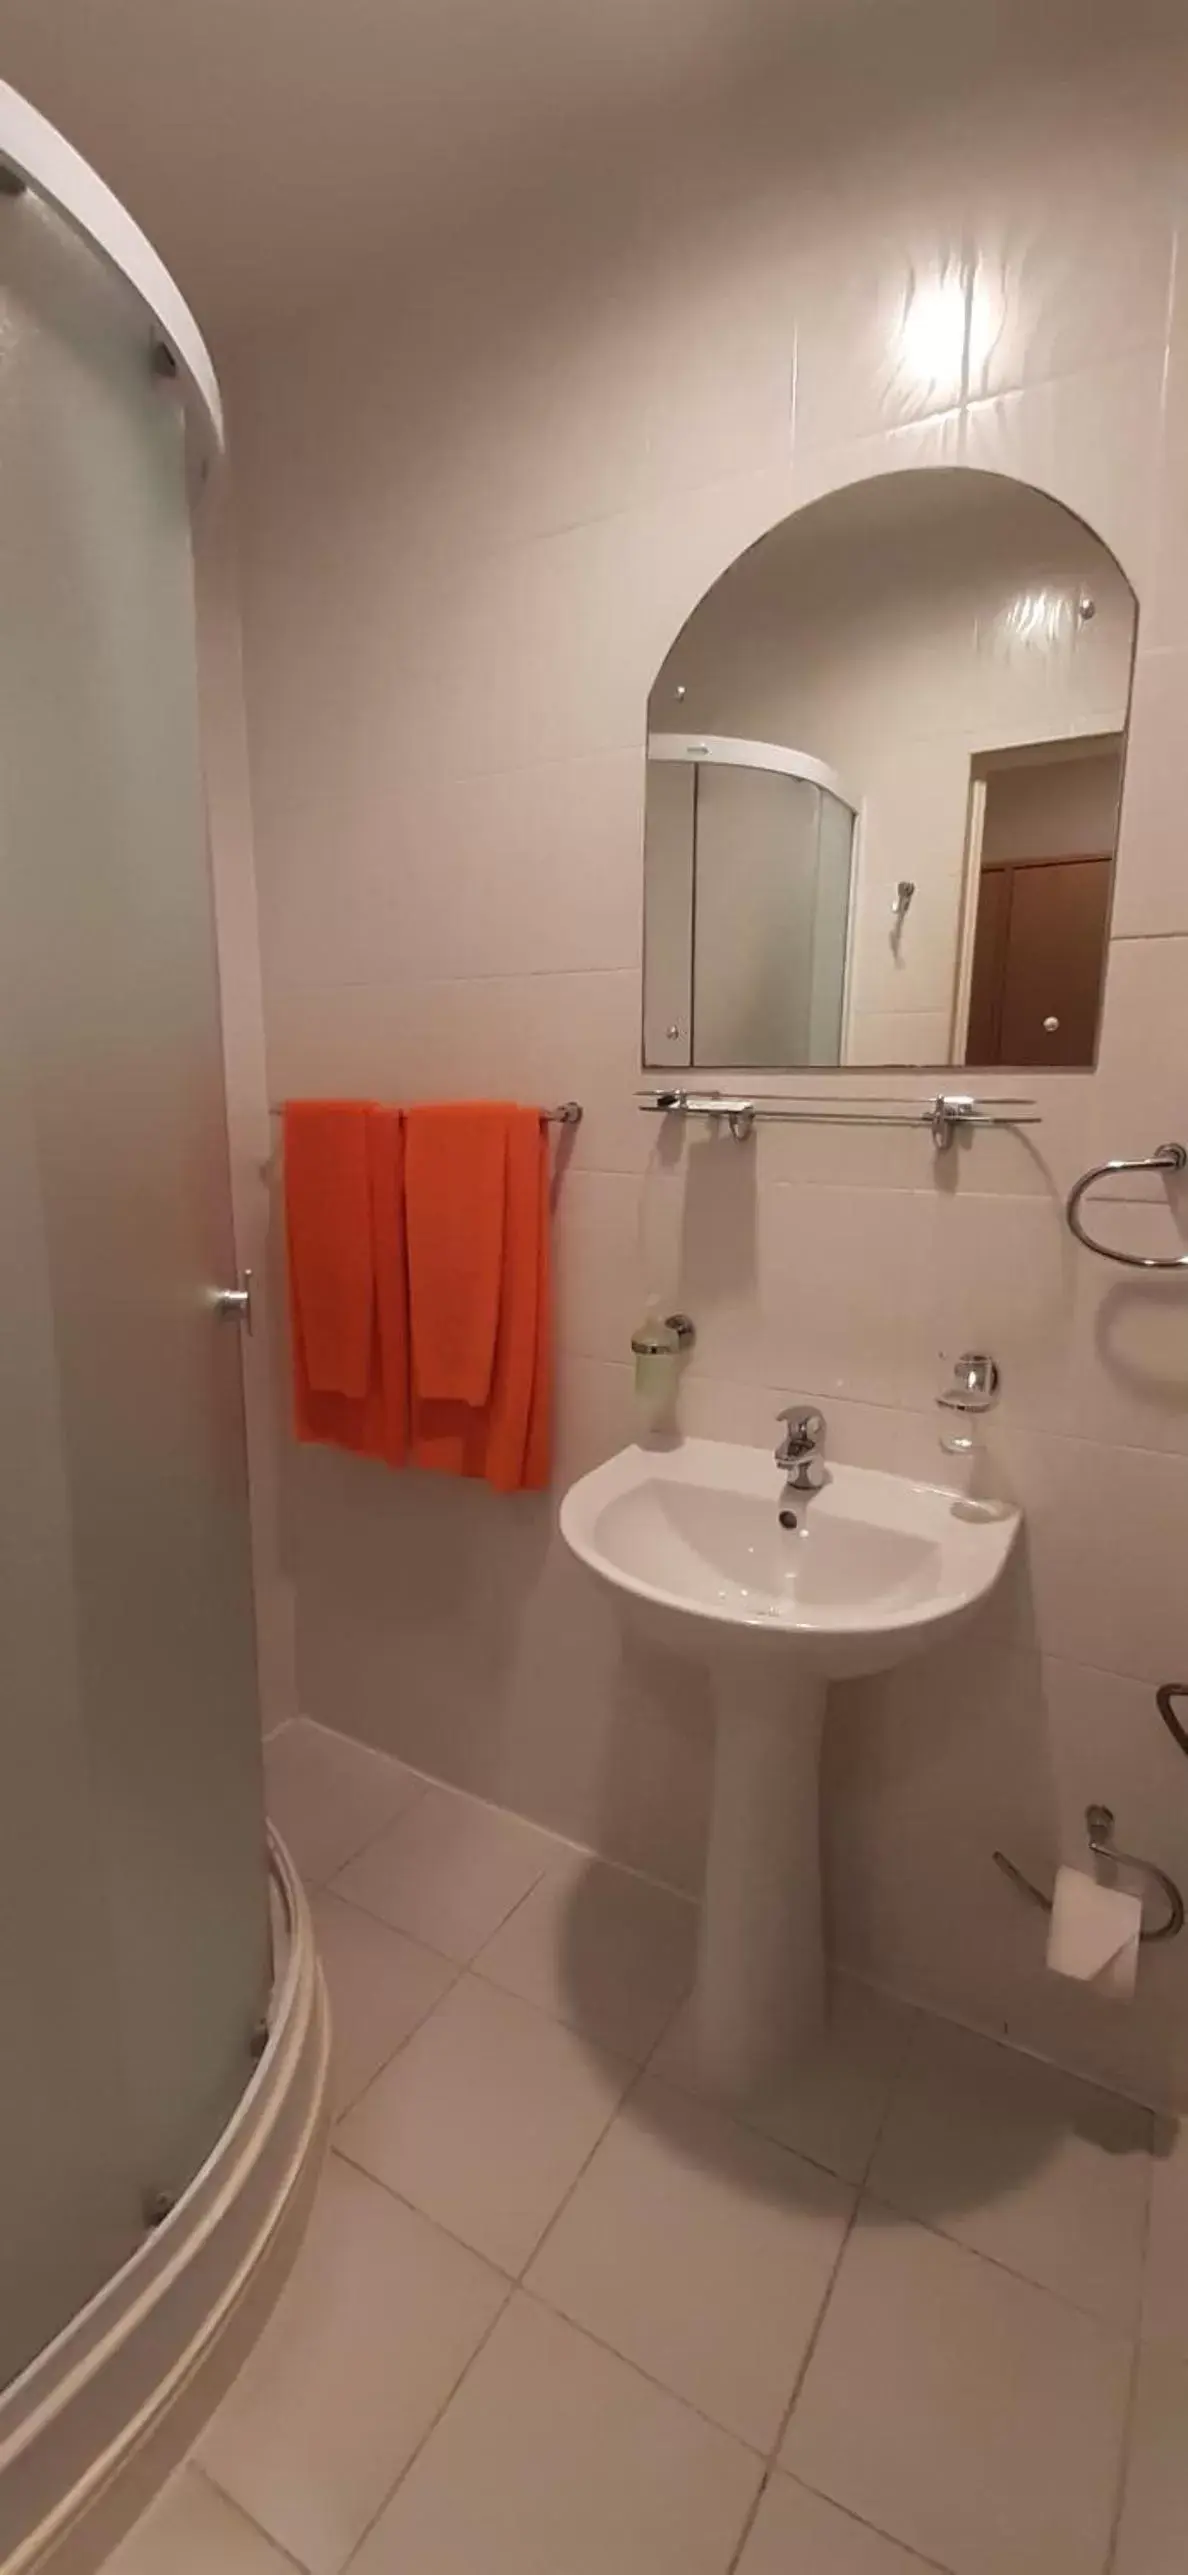 Bathroom in Sky High Hotel Airport 200 meters from the terminal